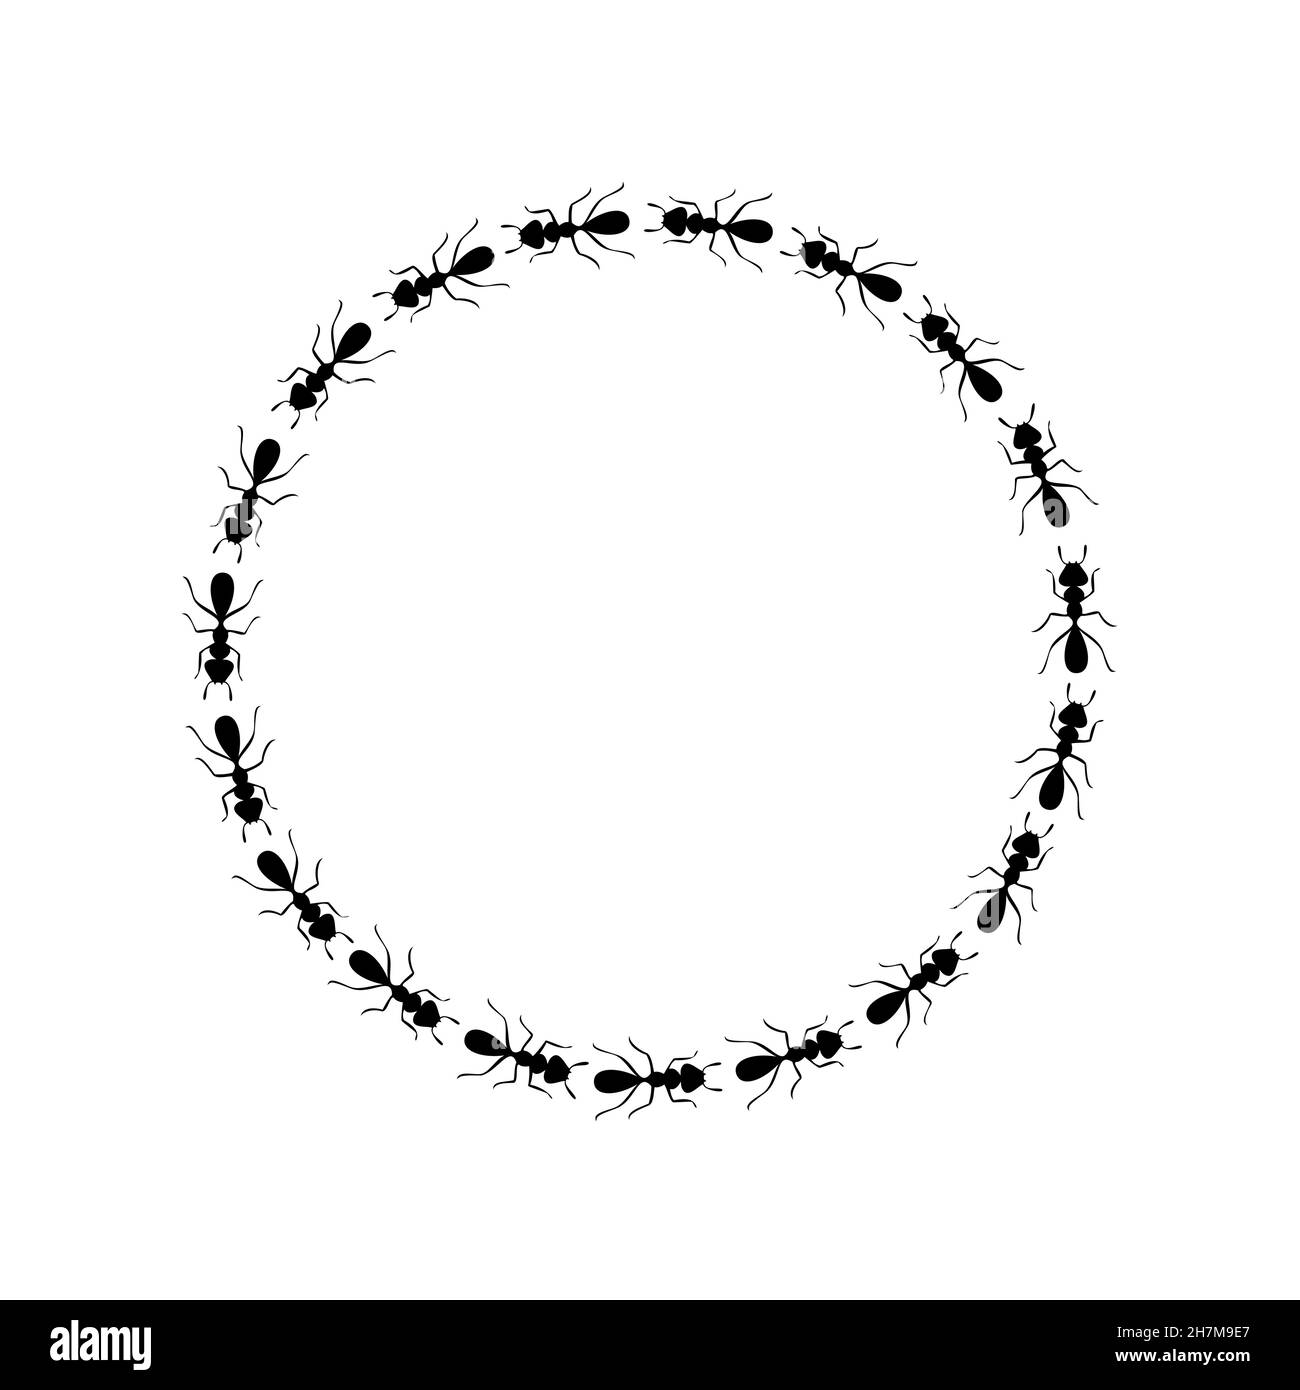 Black ants circle border. Ants forming round shape isolated in white background. Vector illustration Stock Vector